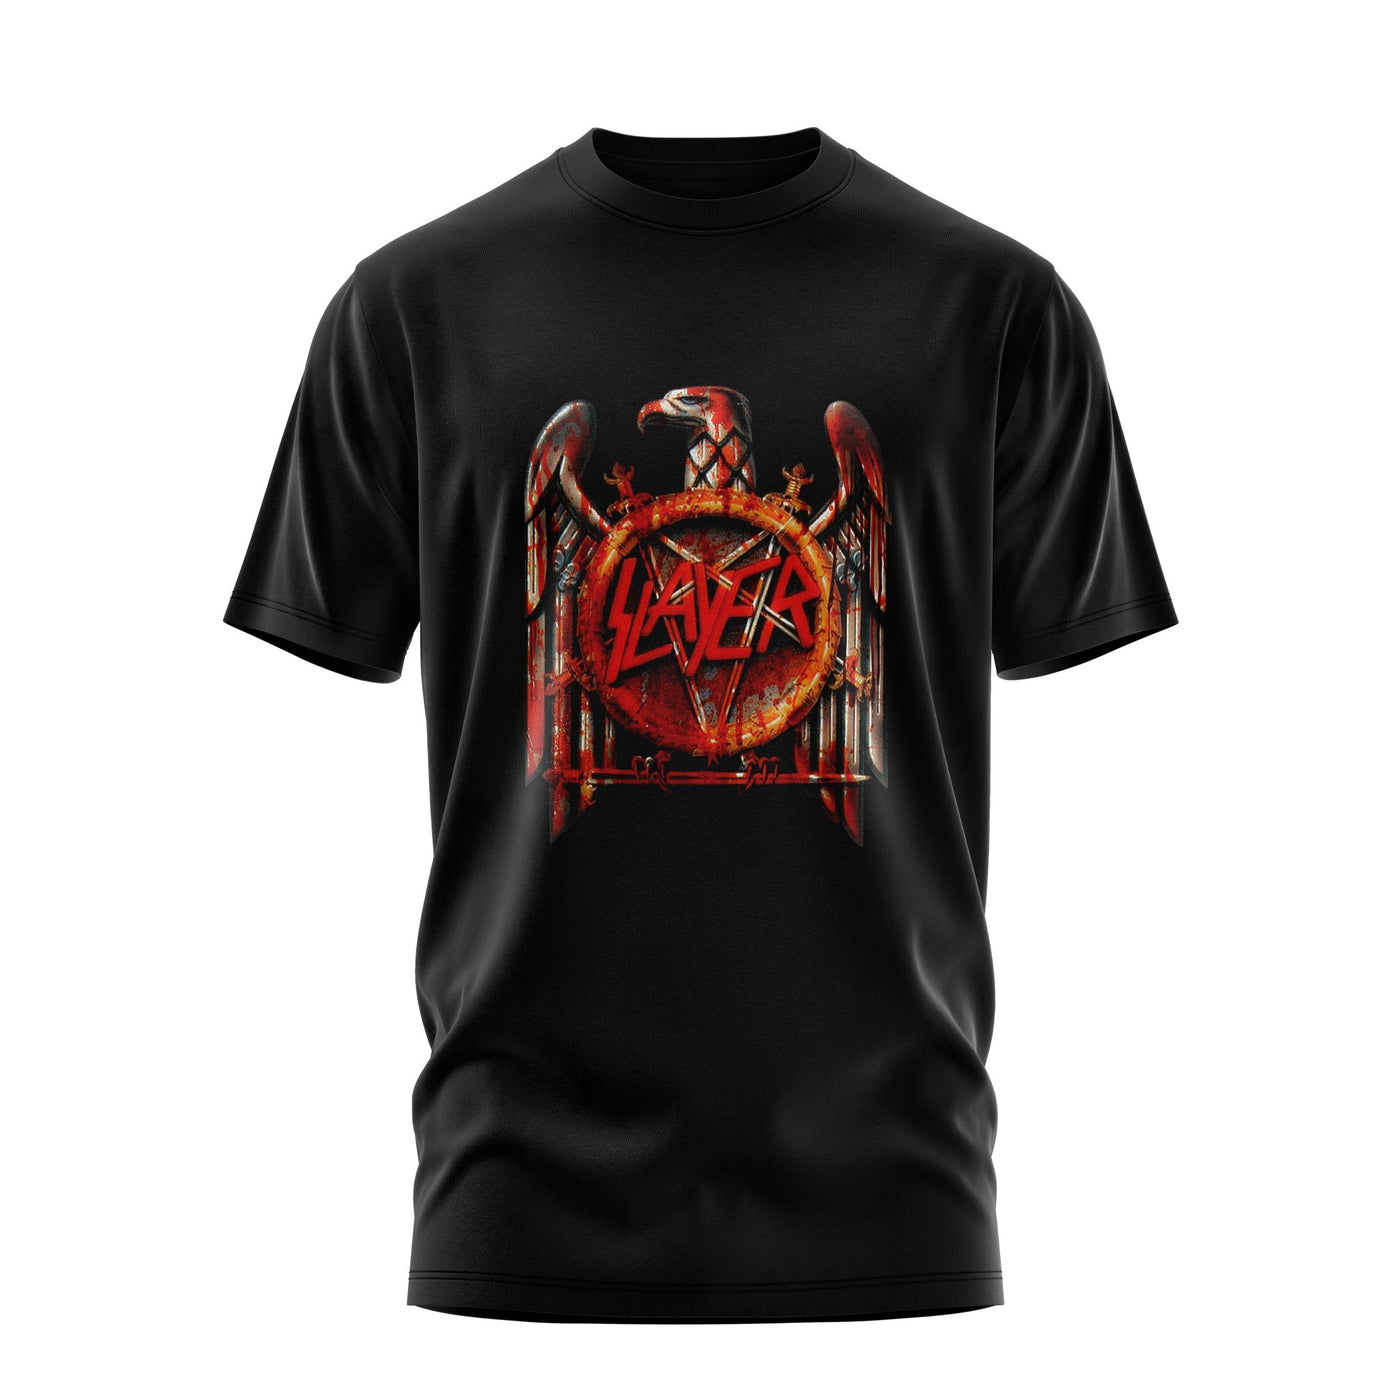 The Slayer Combat Cotton Tee for Men/Women - Summo Sports